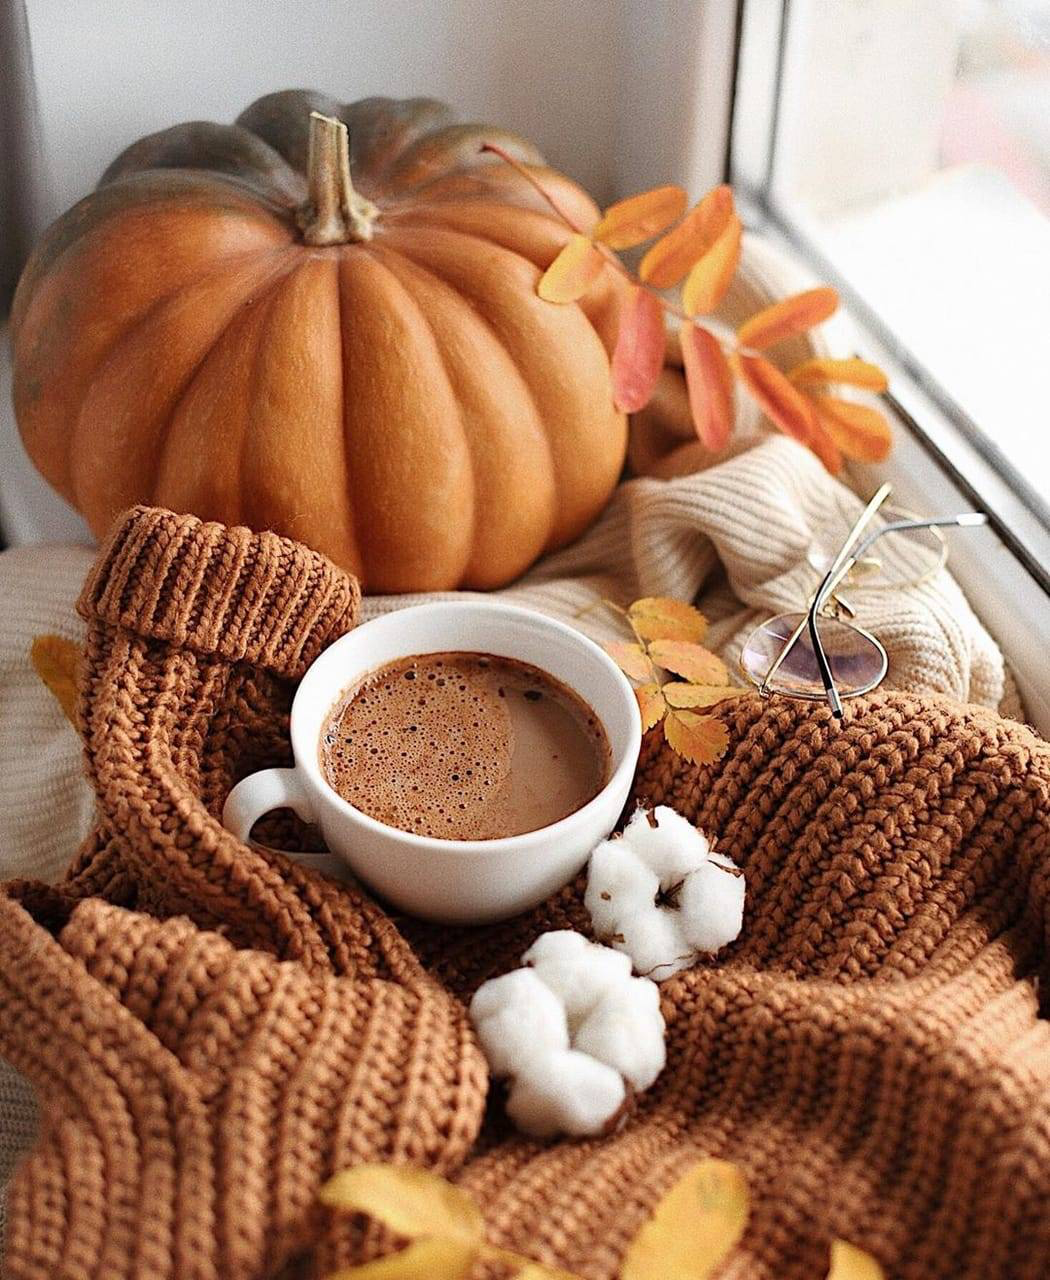 On a scale of 1 to 10 how excited are you for Autumn  candles  coffee latte cozy cozylife cozylifestyl  Autumn photography Fall  vibes Autumn cozy